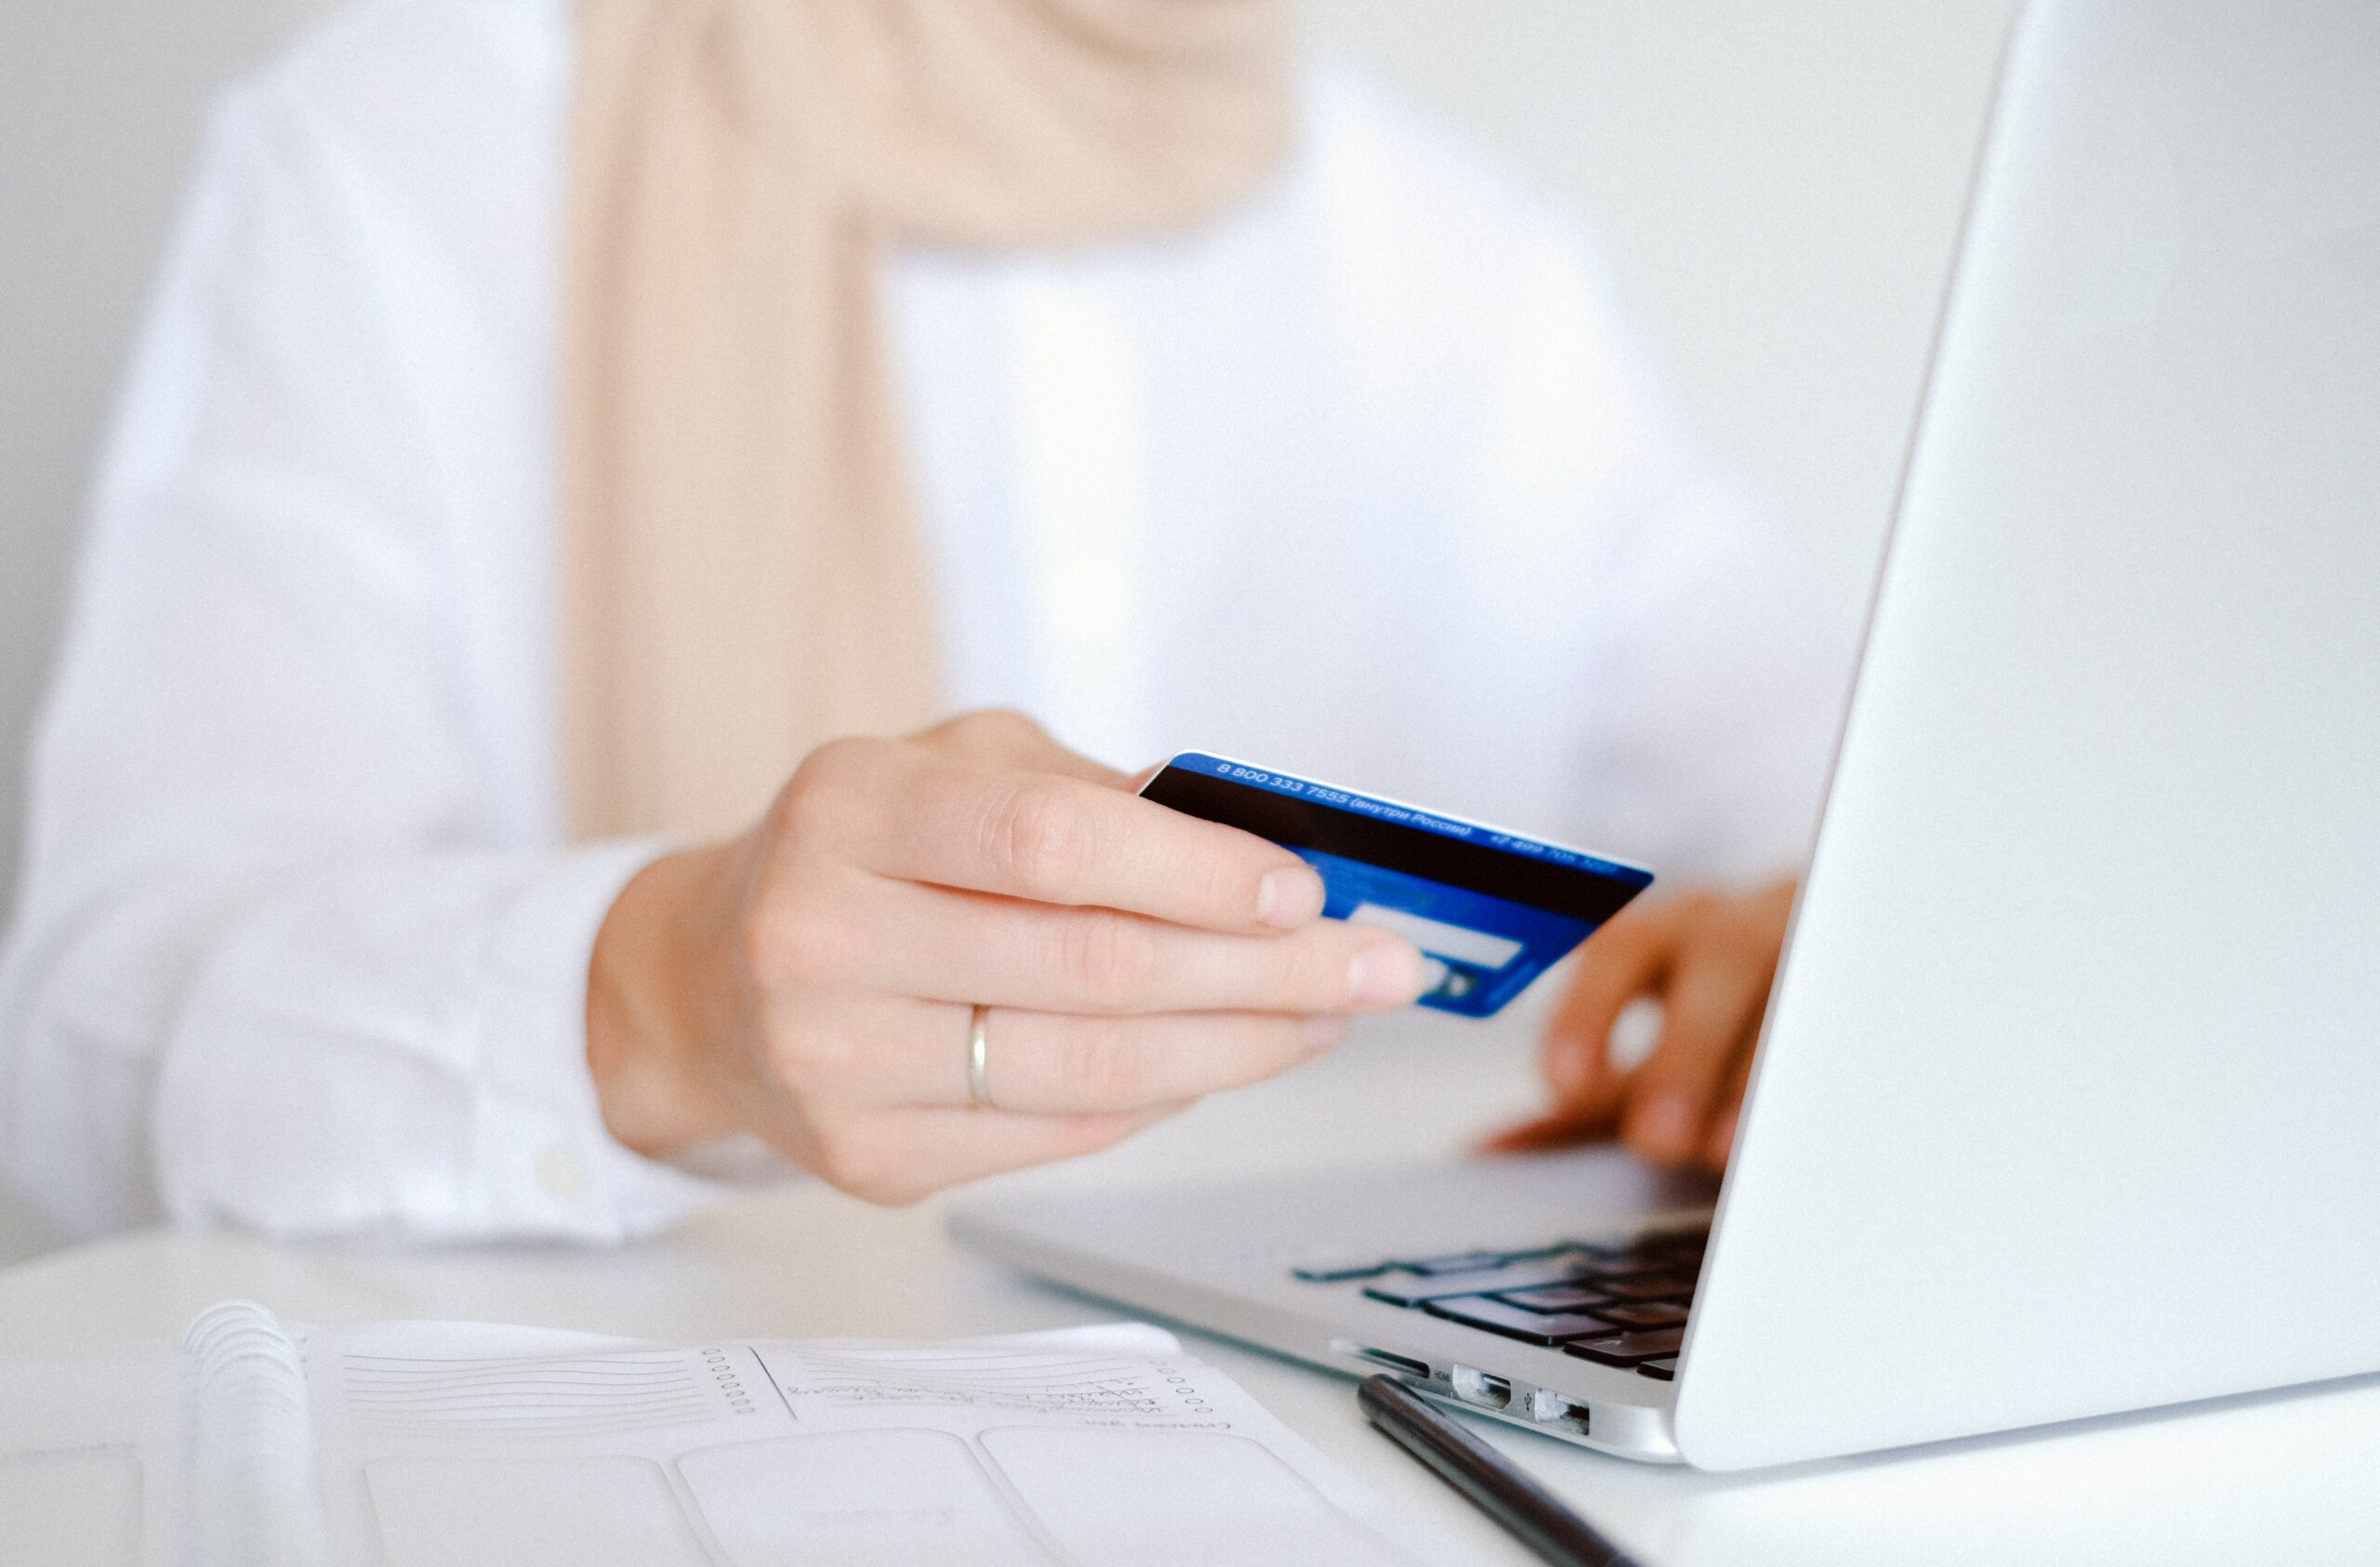 Online shopping with a credit card